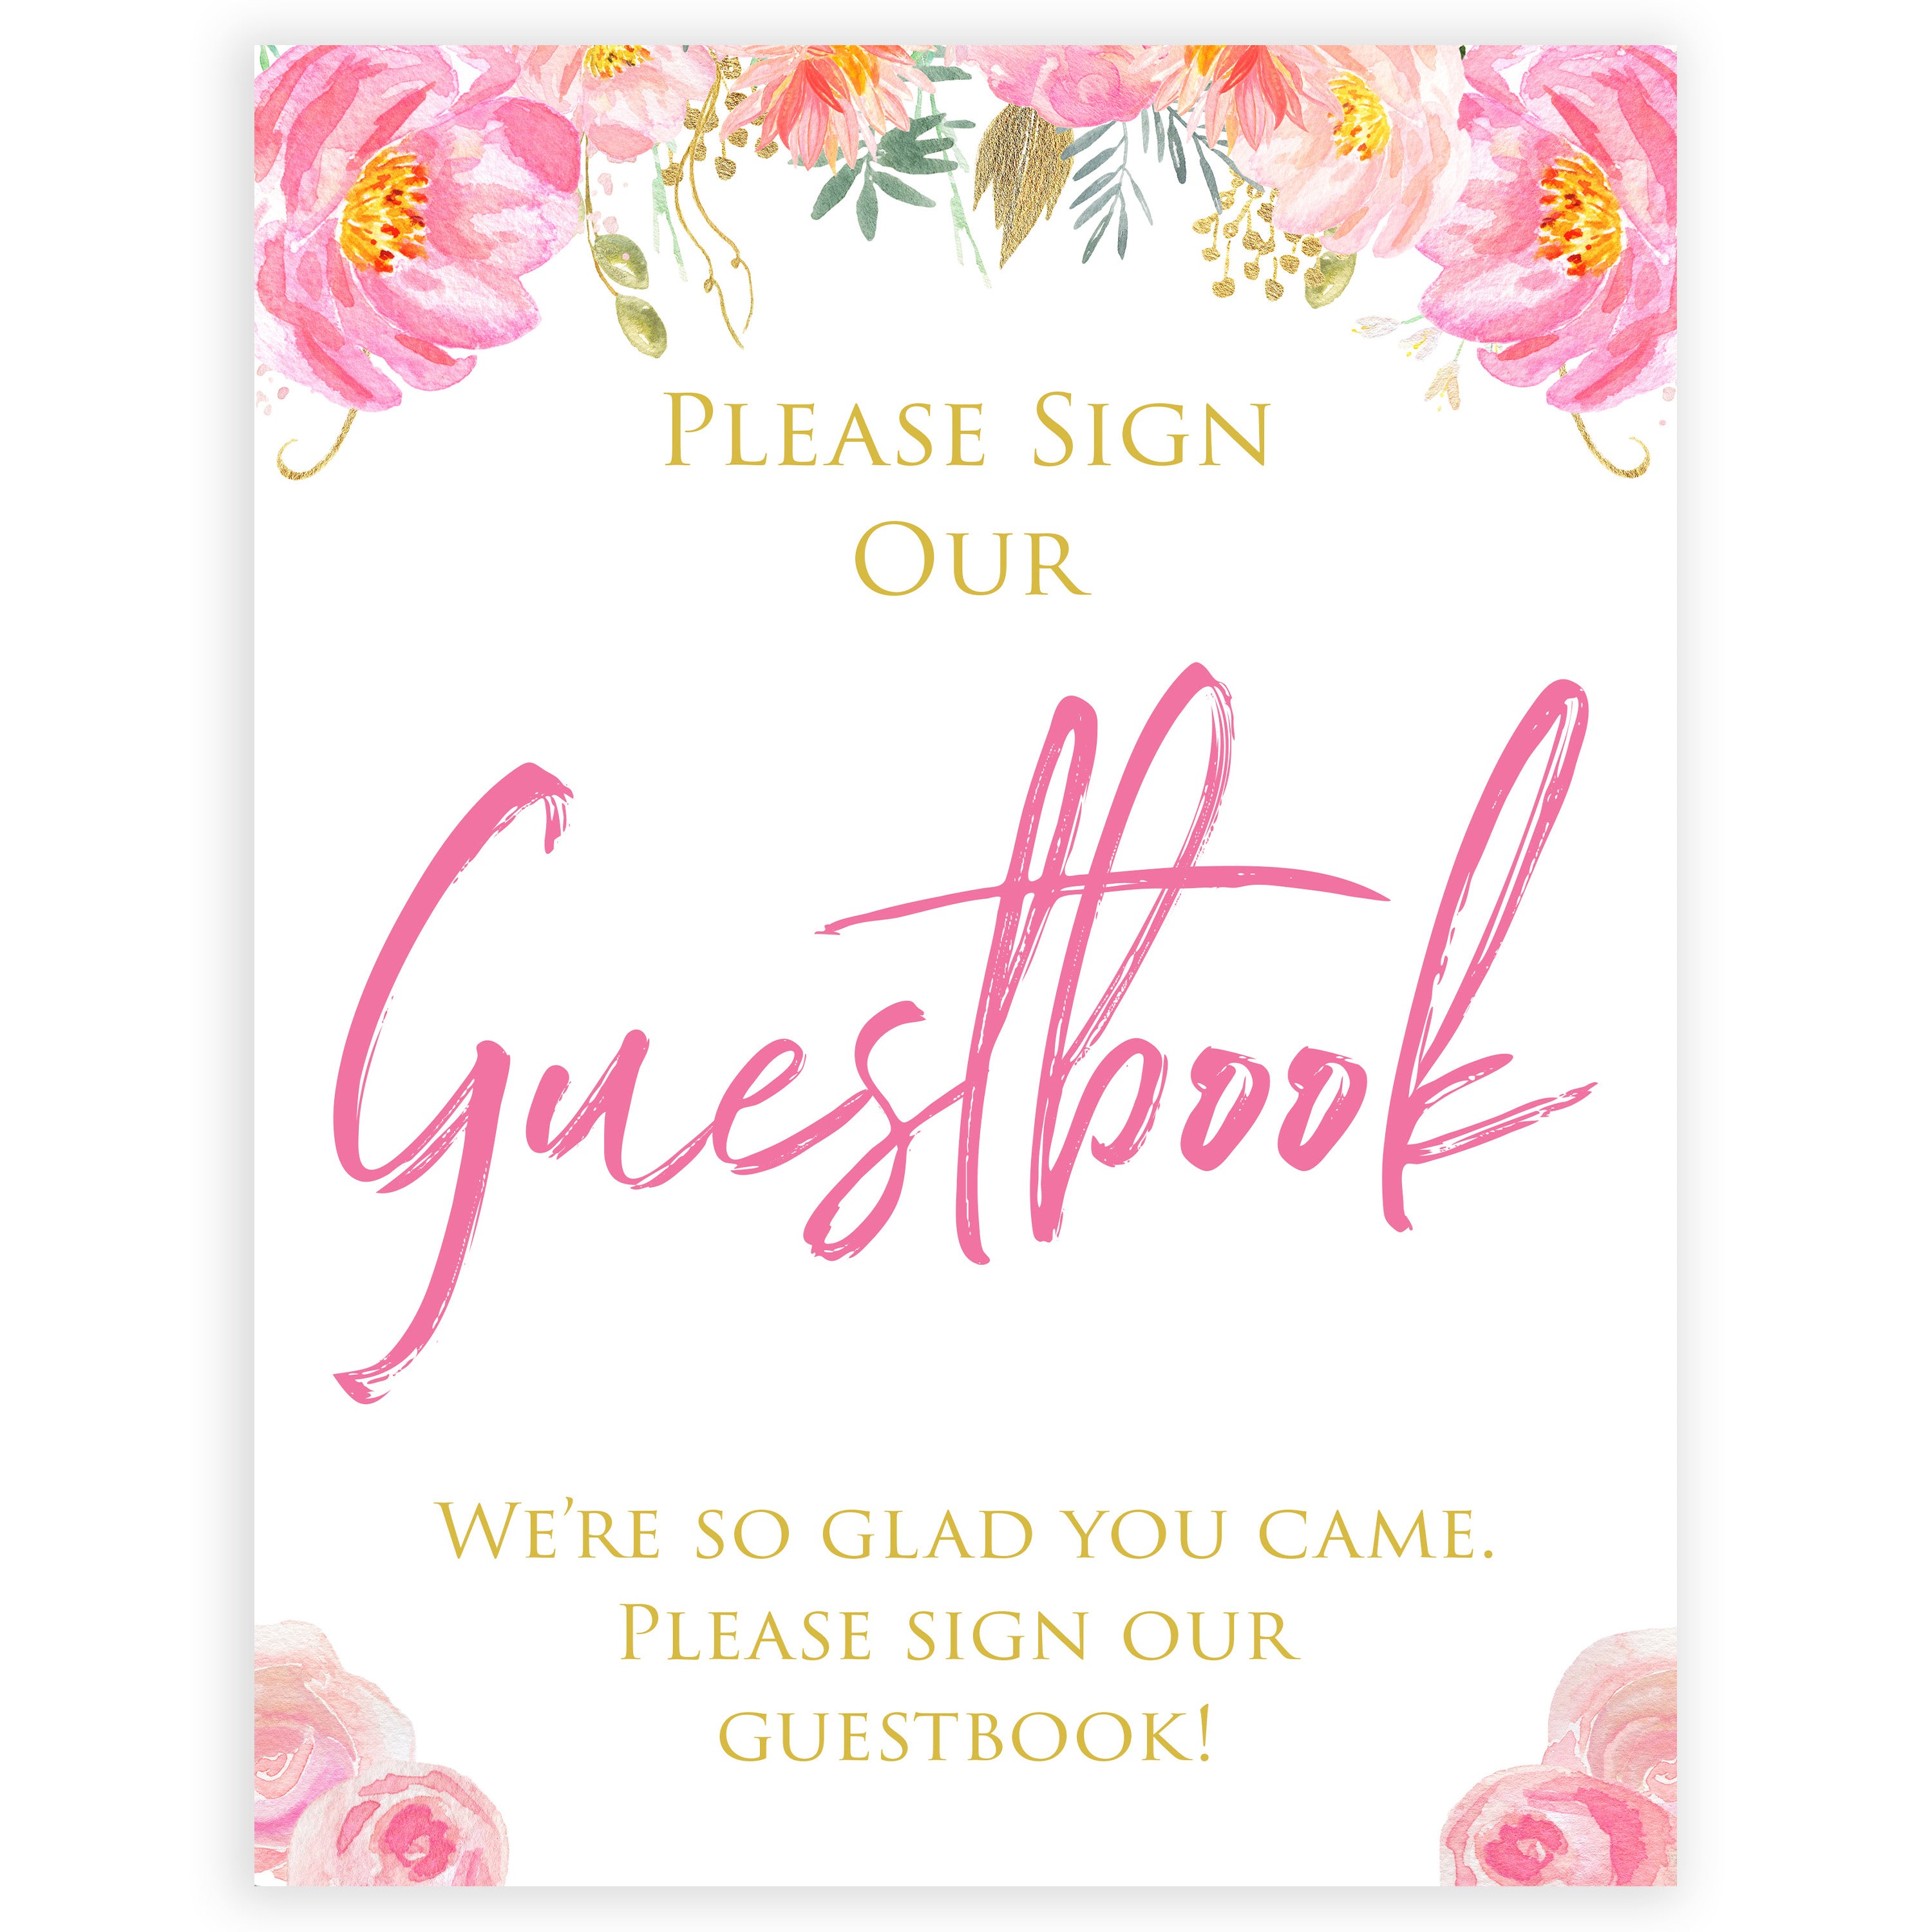 guestbook baby table signs, guestbook baby signs, Blush floral baby decor, printable baby table signs, printable baby decor, gold table signs, fun baby signs, floral fun baby table signs